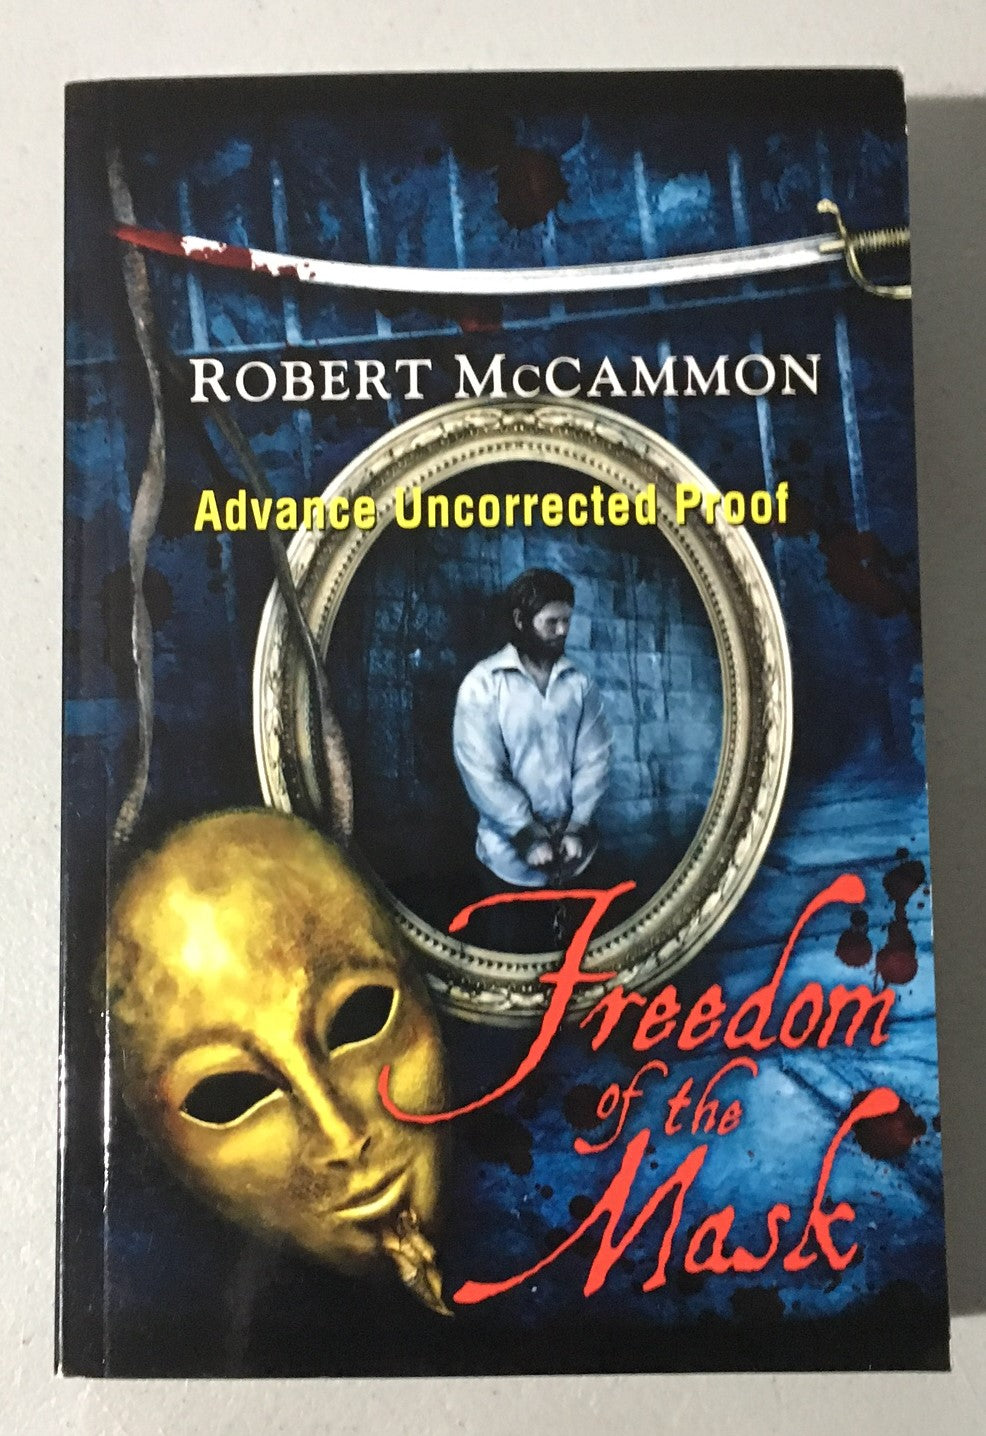 Freedom Of the Mask by Robert McCammon (Rare ARC/Proof - Subterranean Press)